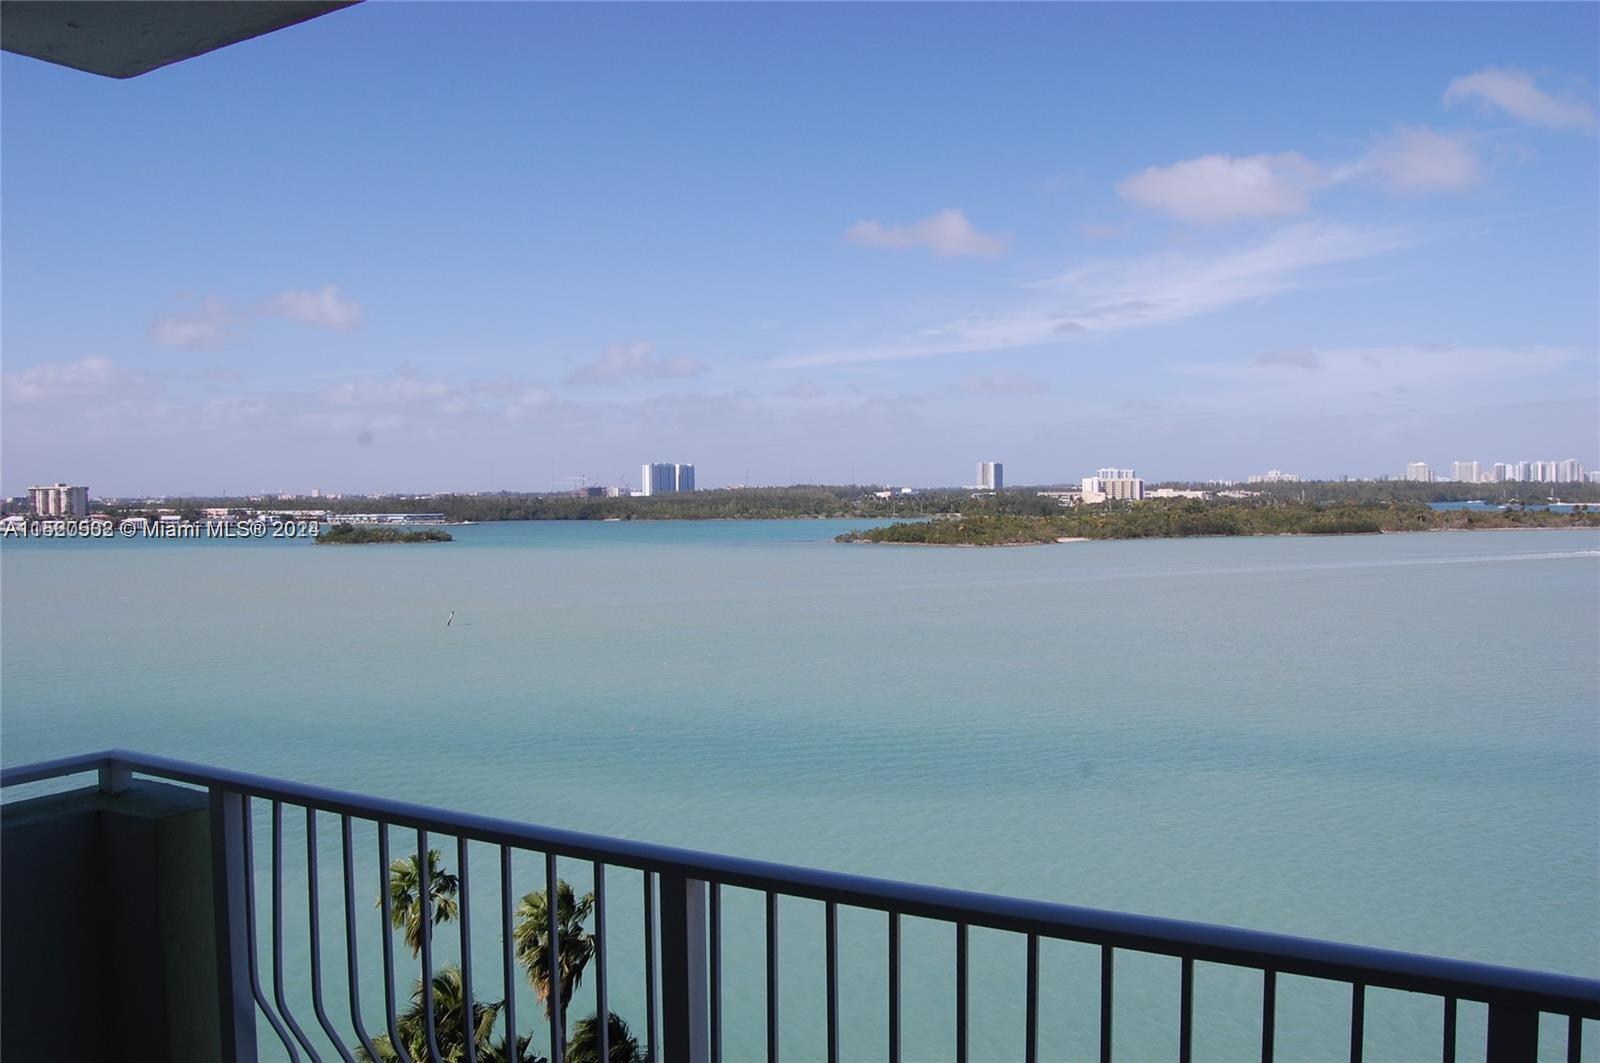 Spacious 3 bedroom 2.5 bath condo in Bay Harbor Island, with a spectacular view of the bay and intercoastal. Unit comes with 1 storage, 1 covered parking and 1 uncovered parking. The Unit features: washer and dryer in the unit, stainless steel appliances, marble floors, granite counter-tops and backslash. The building has amenities such as: party room, Gymnasium, Pool and Motor-boat Docks. The town also provides an A, K-8 school. The unit has been meticulously cleaned and painted.